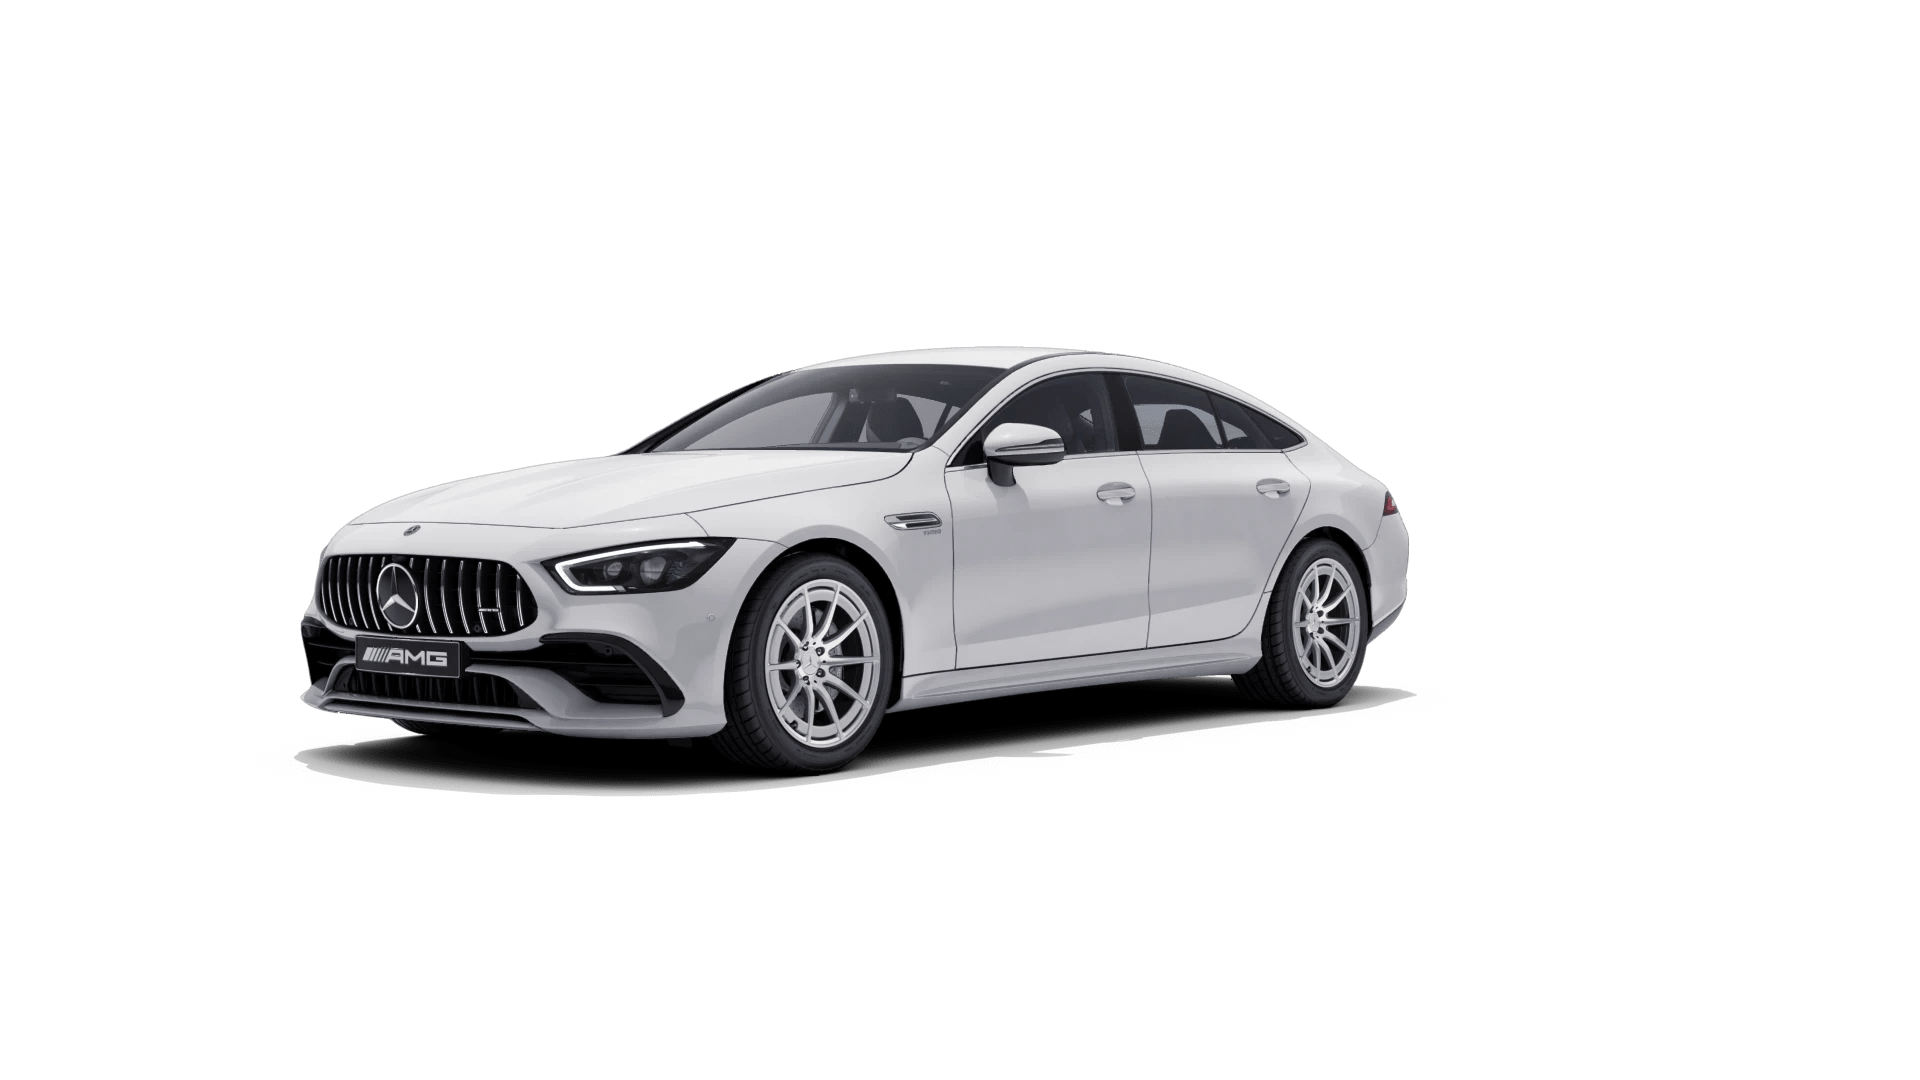 mercedes-AMG GT 4-door coupe blends functionality into race-car form